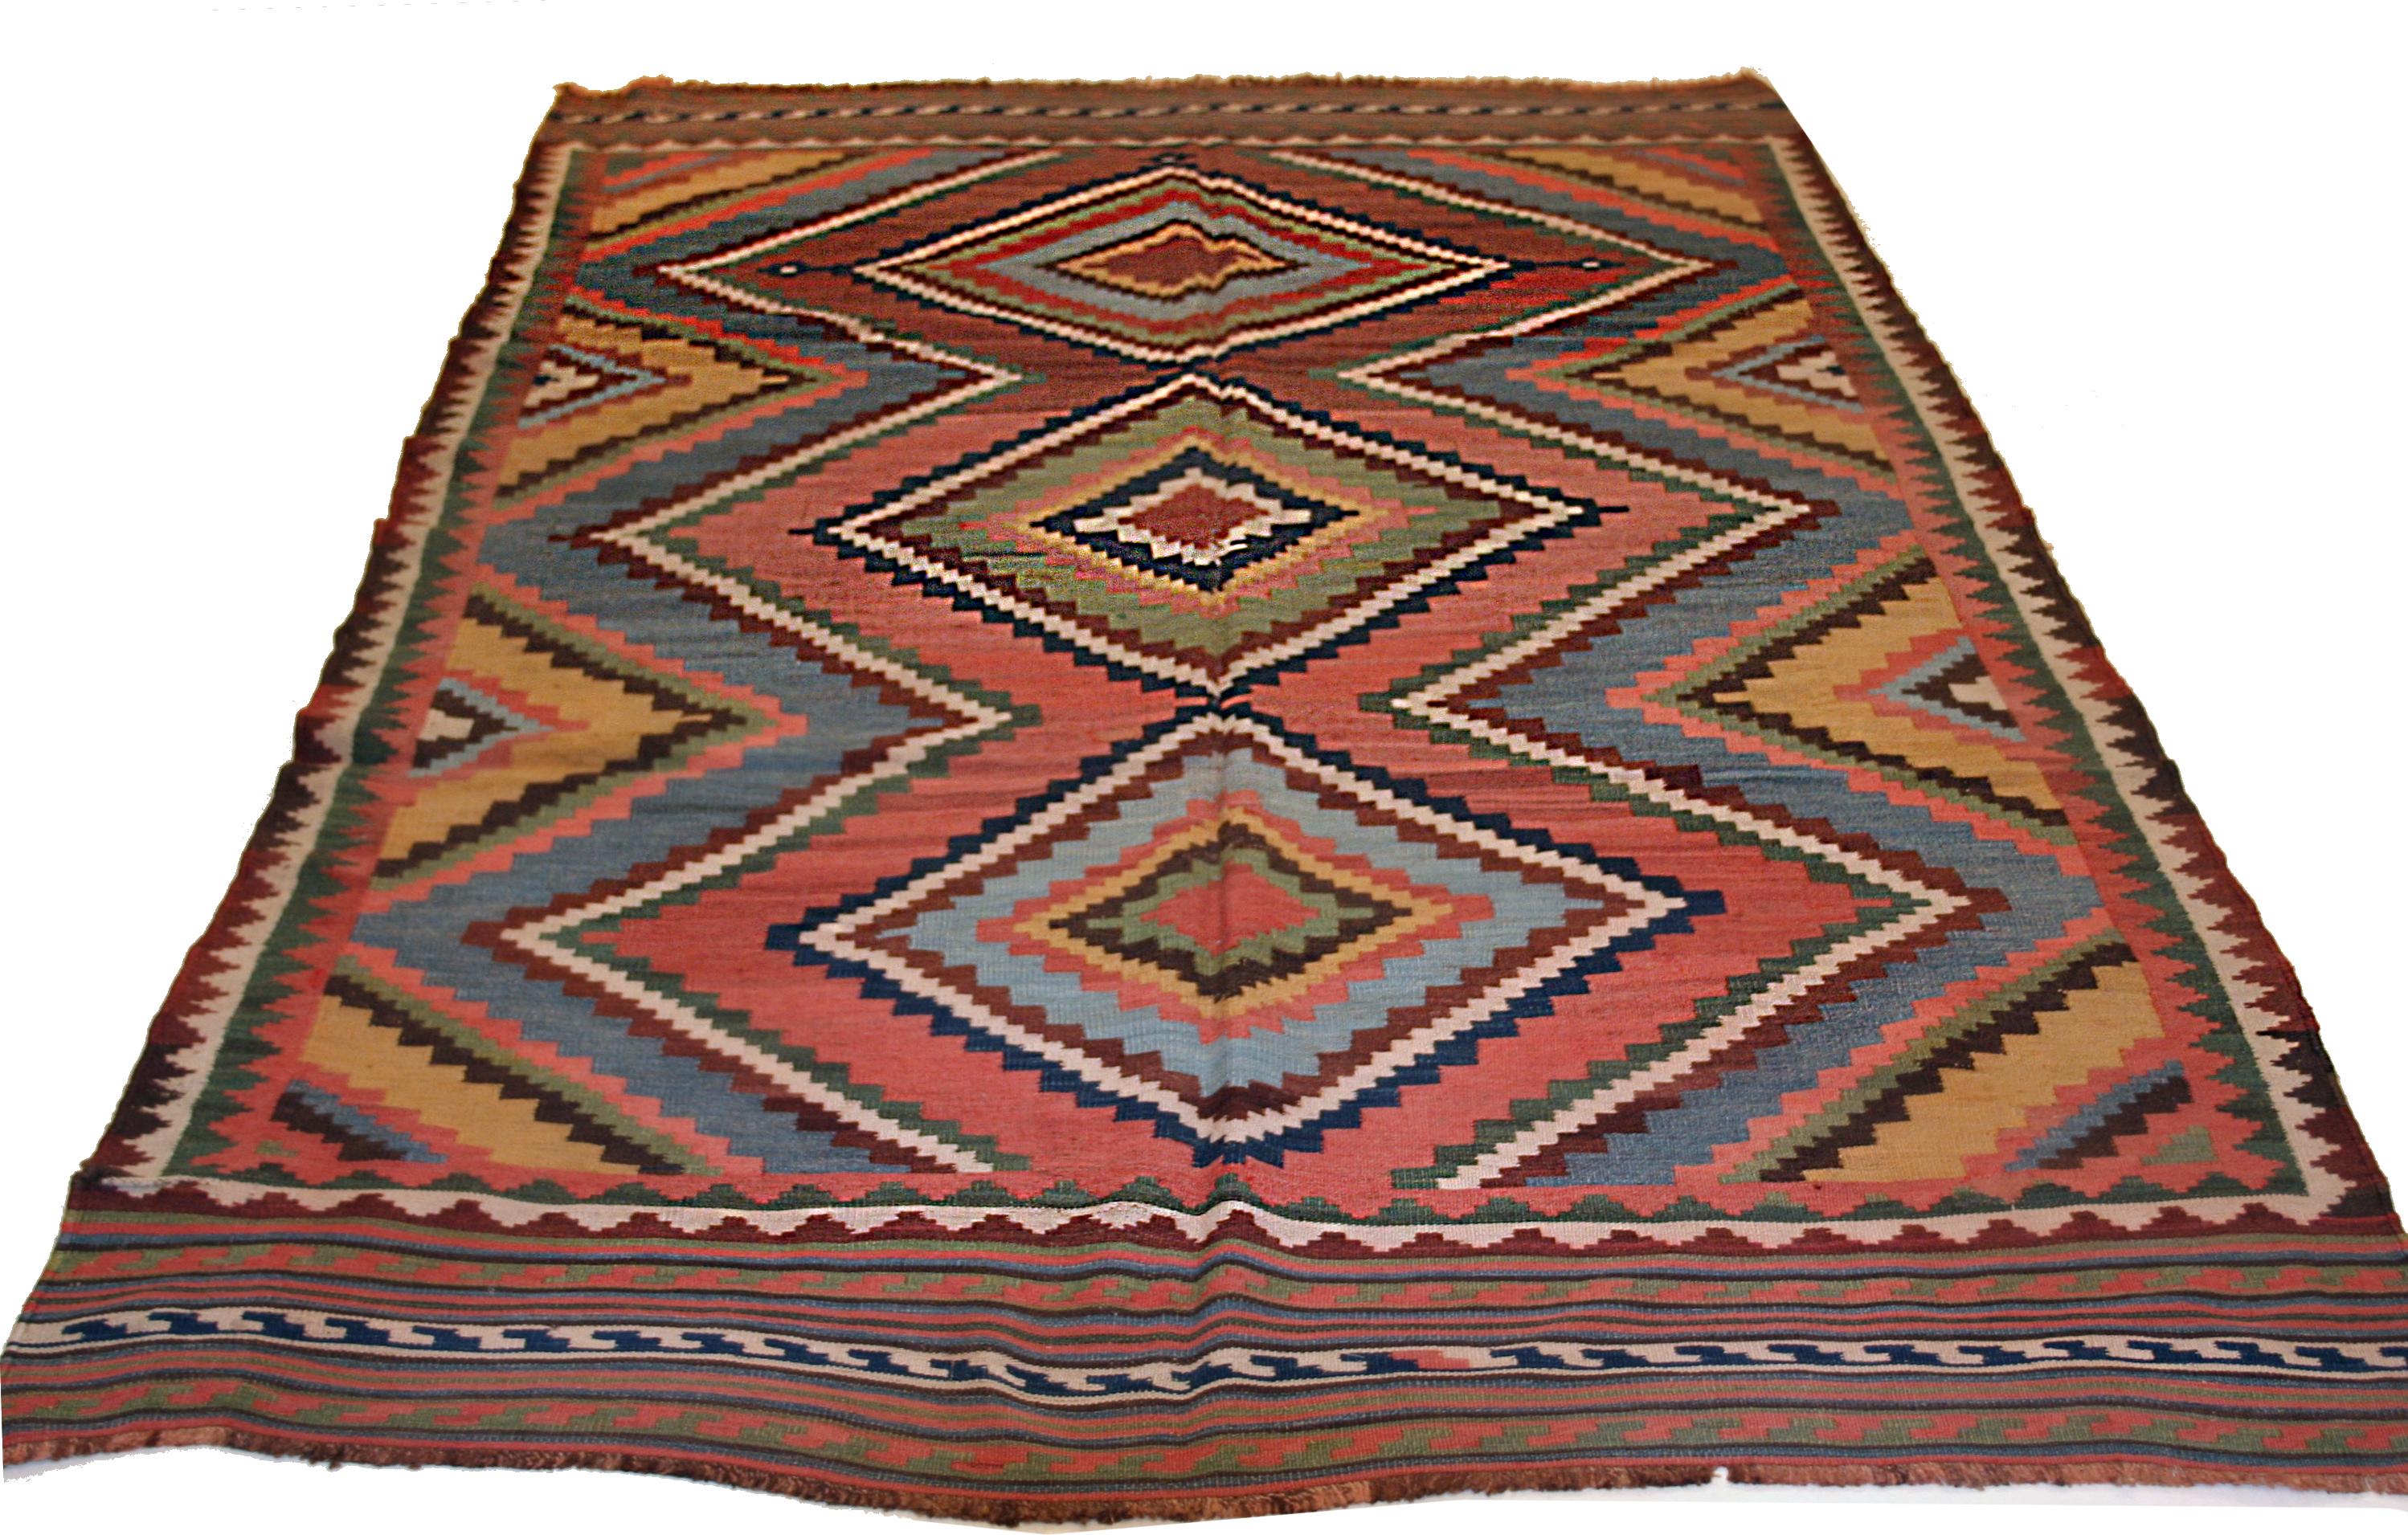 A stunning antique Kilim distinguished by parallel and offset rows of concentric, polychrome diamonds laid over a light blue background. Kilims of this type, exhibiting a full range of natural dyes, are extremely difficult to come by, especially in